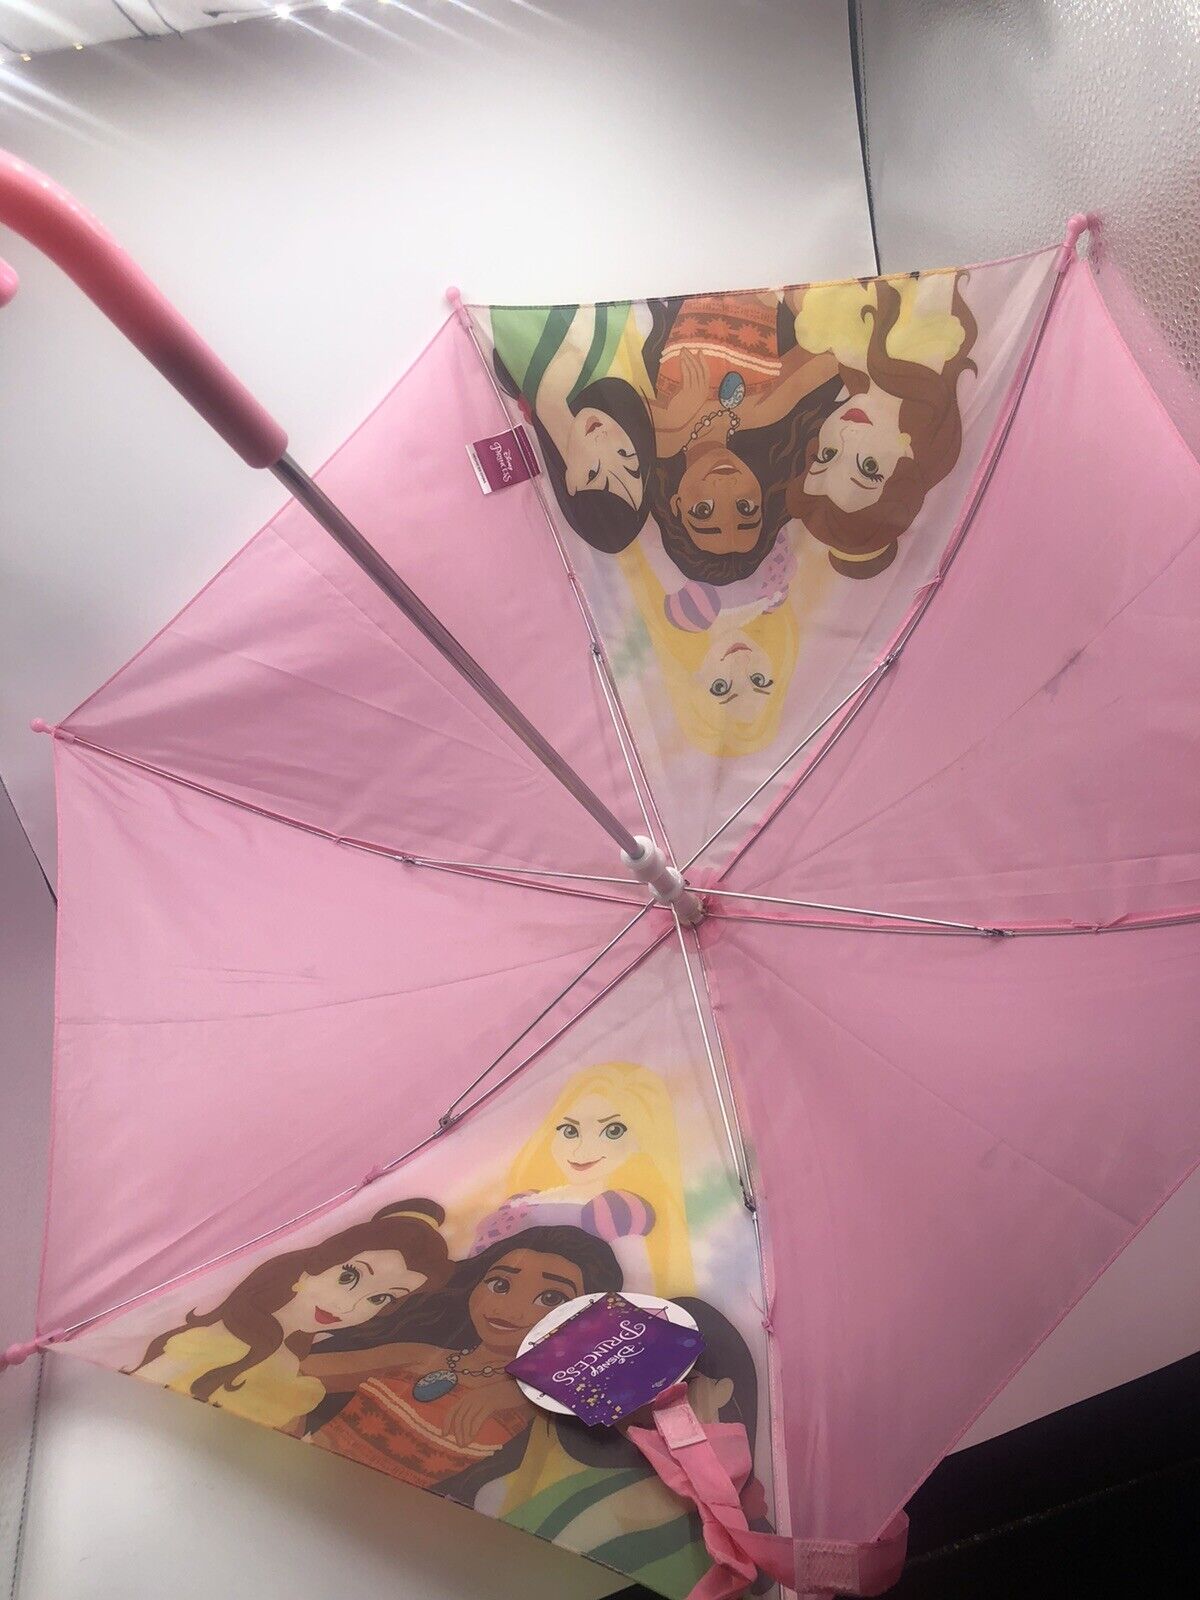 Disney Princess Youth Toddler Umbrella 27" Point To Point & 20" Long Handle